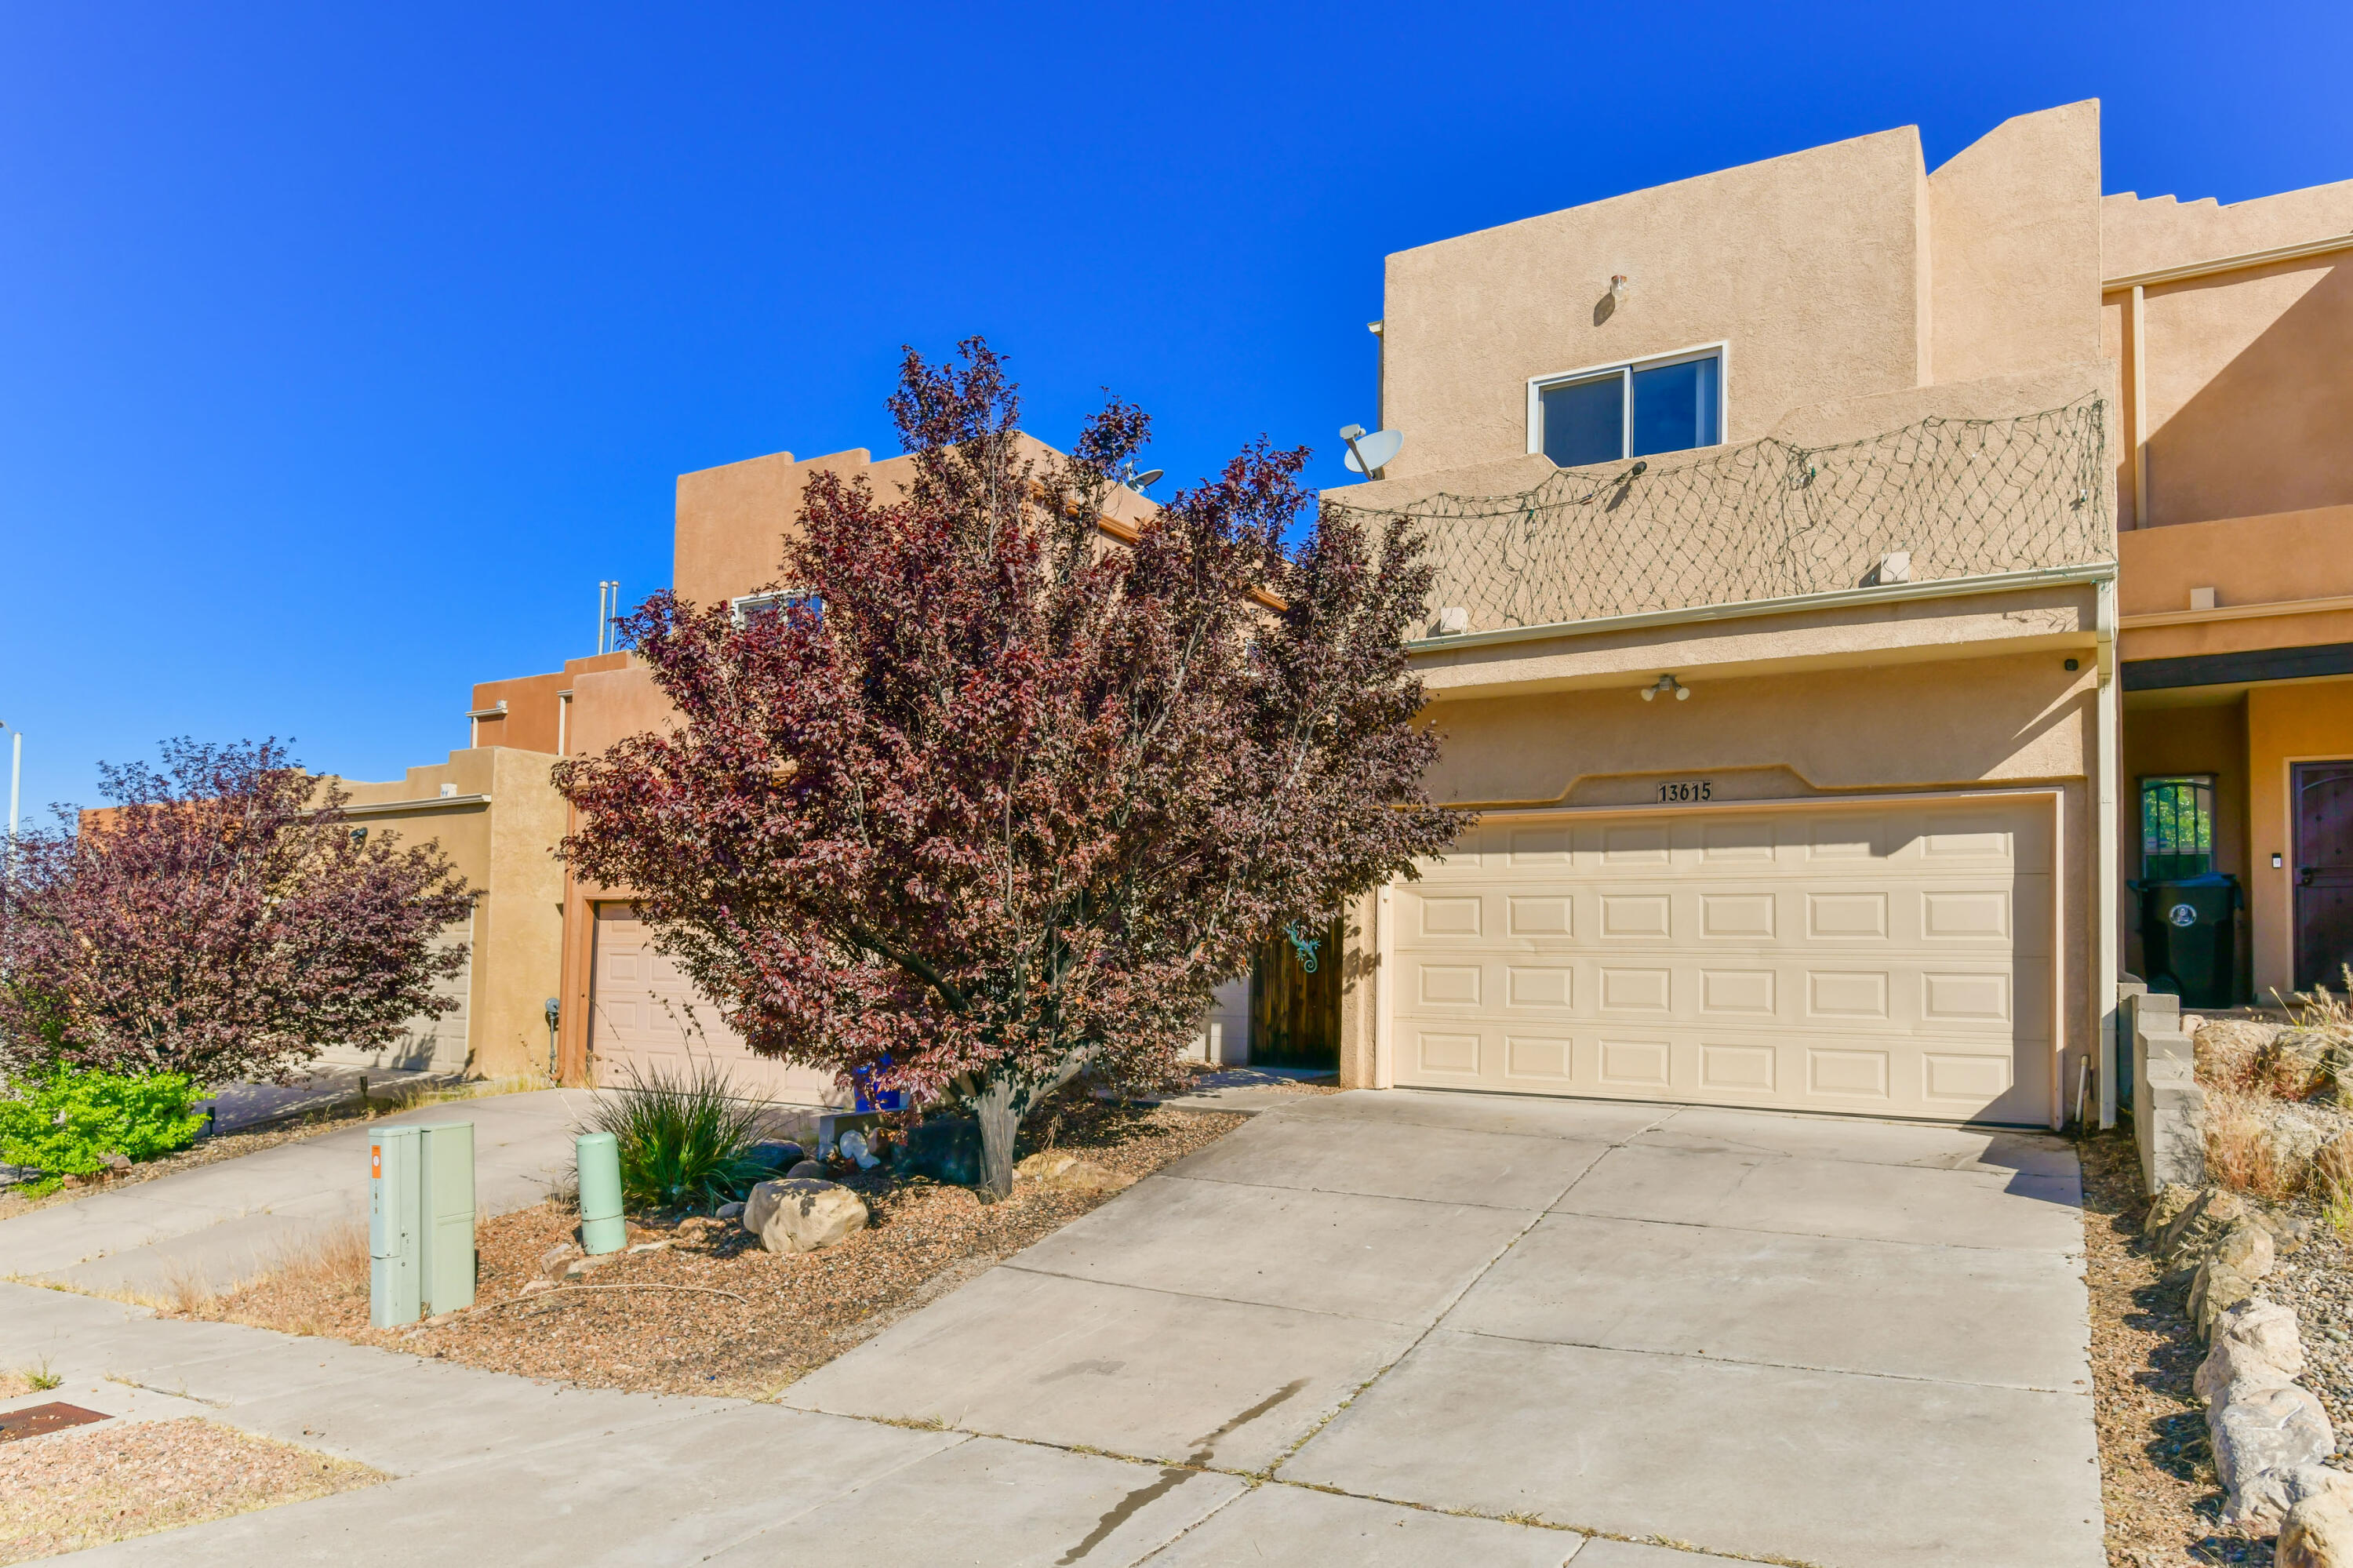 beautiful Town home ,with two balconies, good size bedrooms, brand new roof installed in 03/21, close to shopping , freeways, Restaurants, movie theaters and much more, all 6 TVs stay , and appliances stay